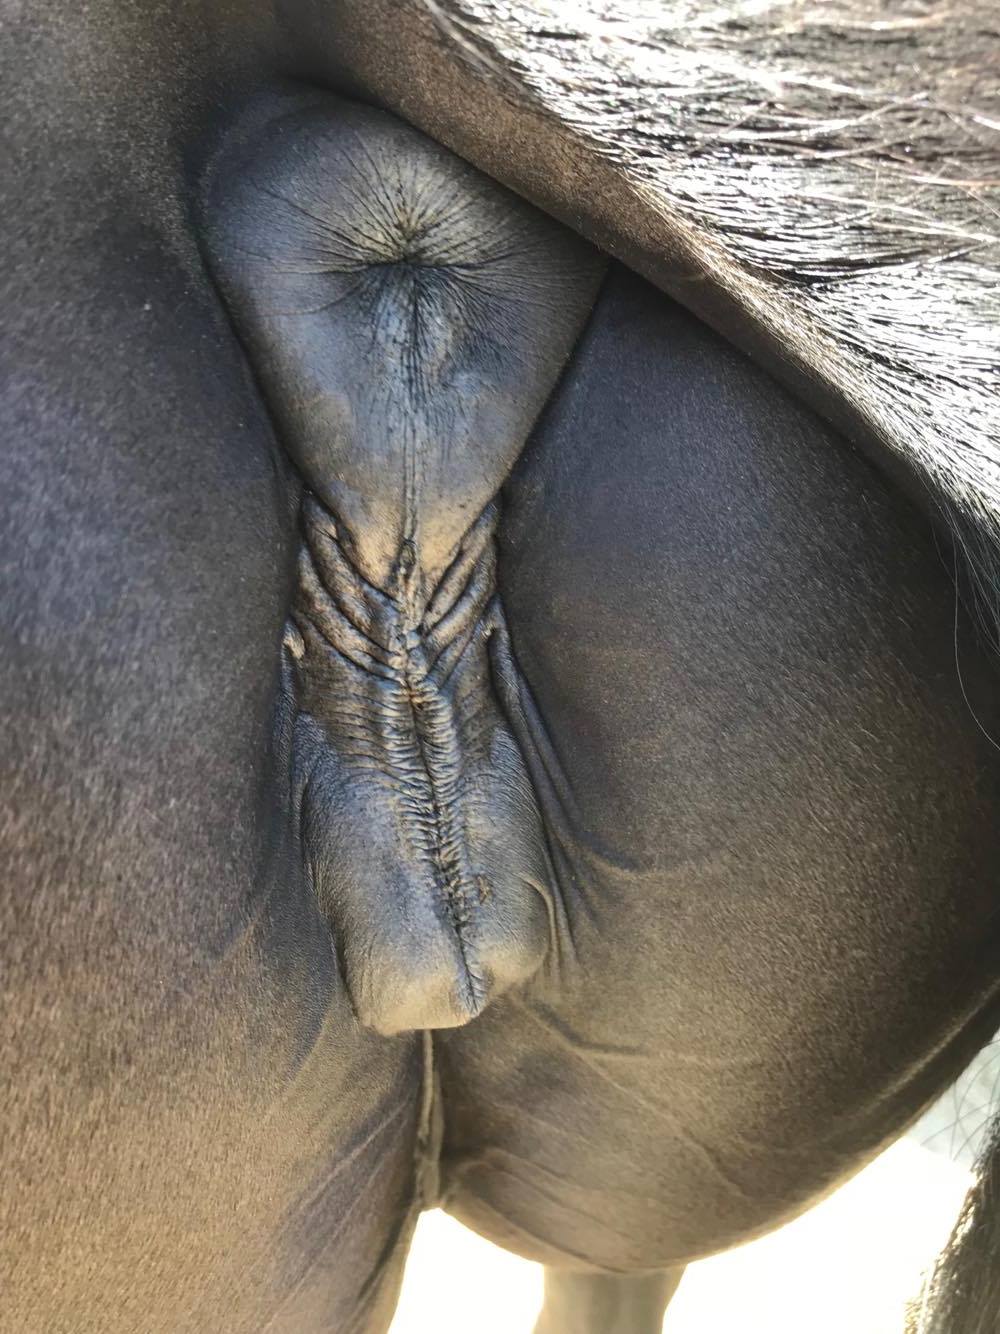 Huge Mare Pussy